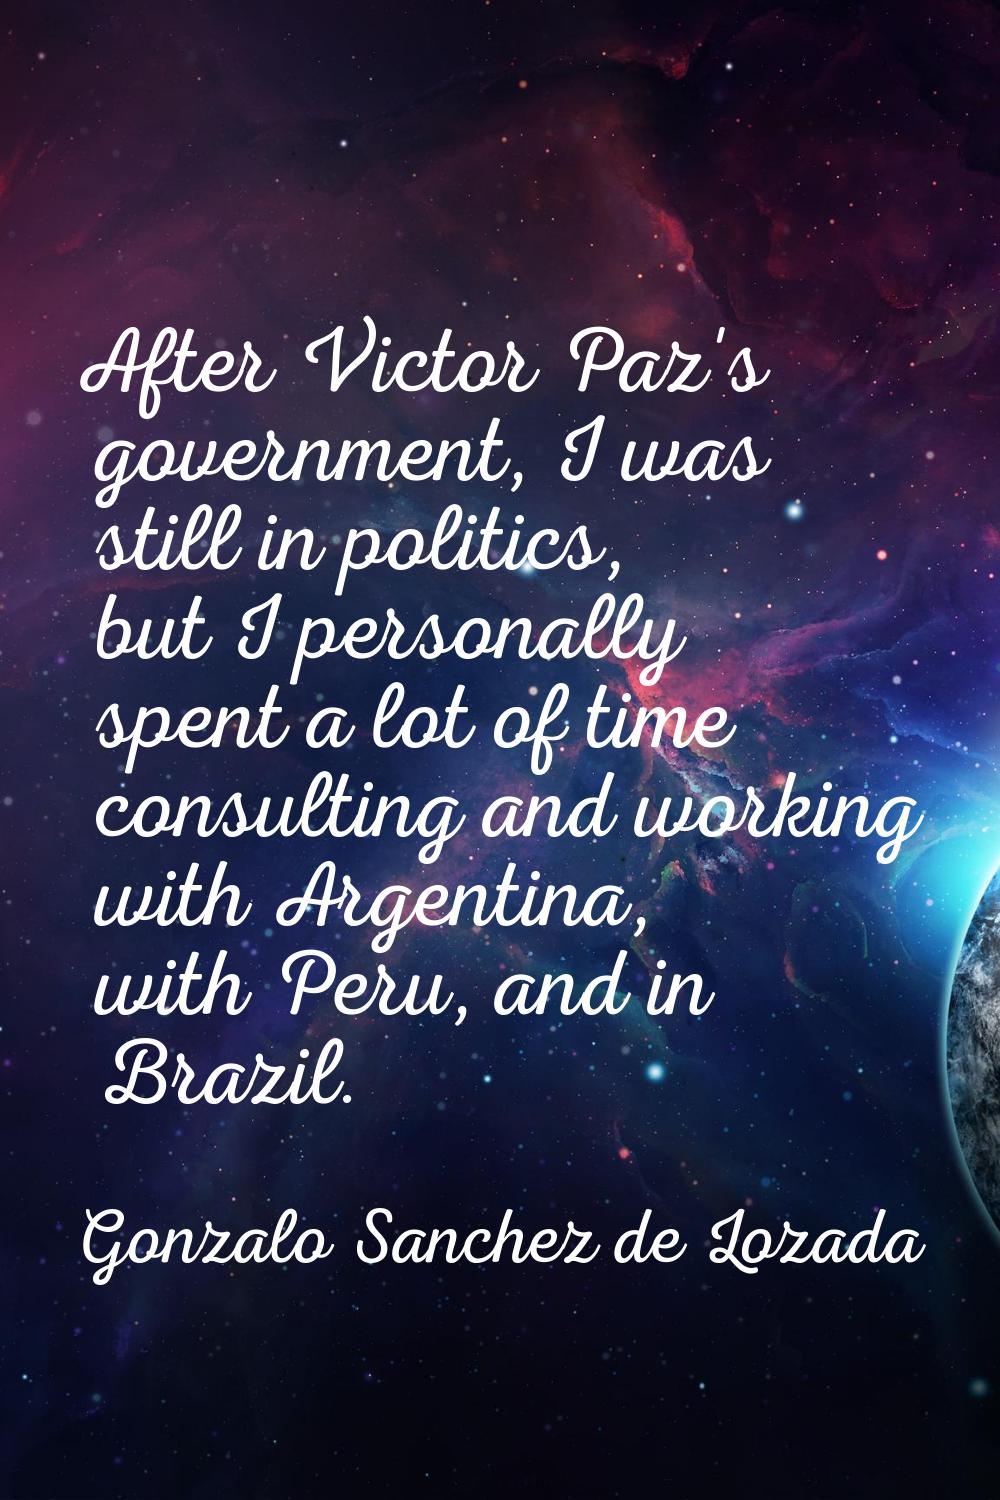 After Victor Paz's government, I was still in politics, but I personally spent a lot of time consul